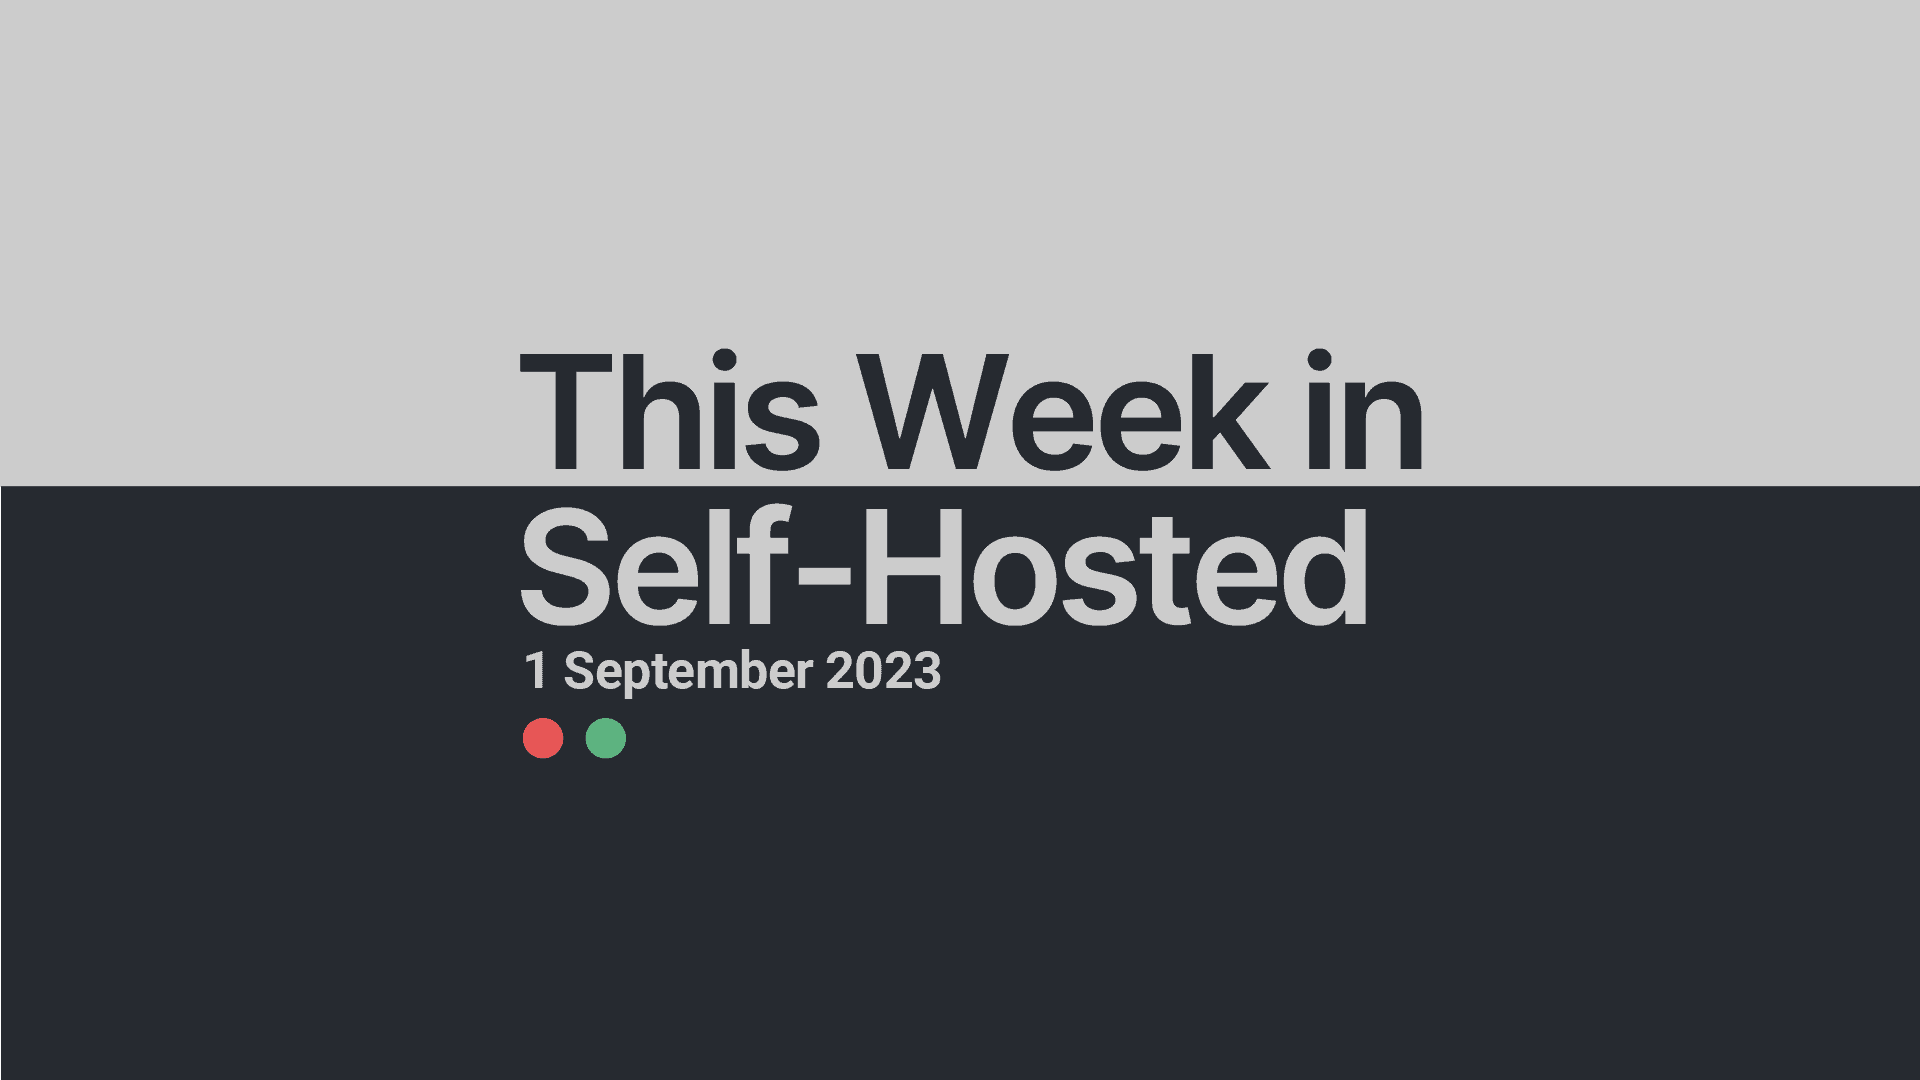 This Week in Self-Hosted (1 September 2023) Post image